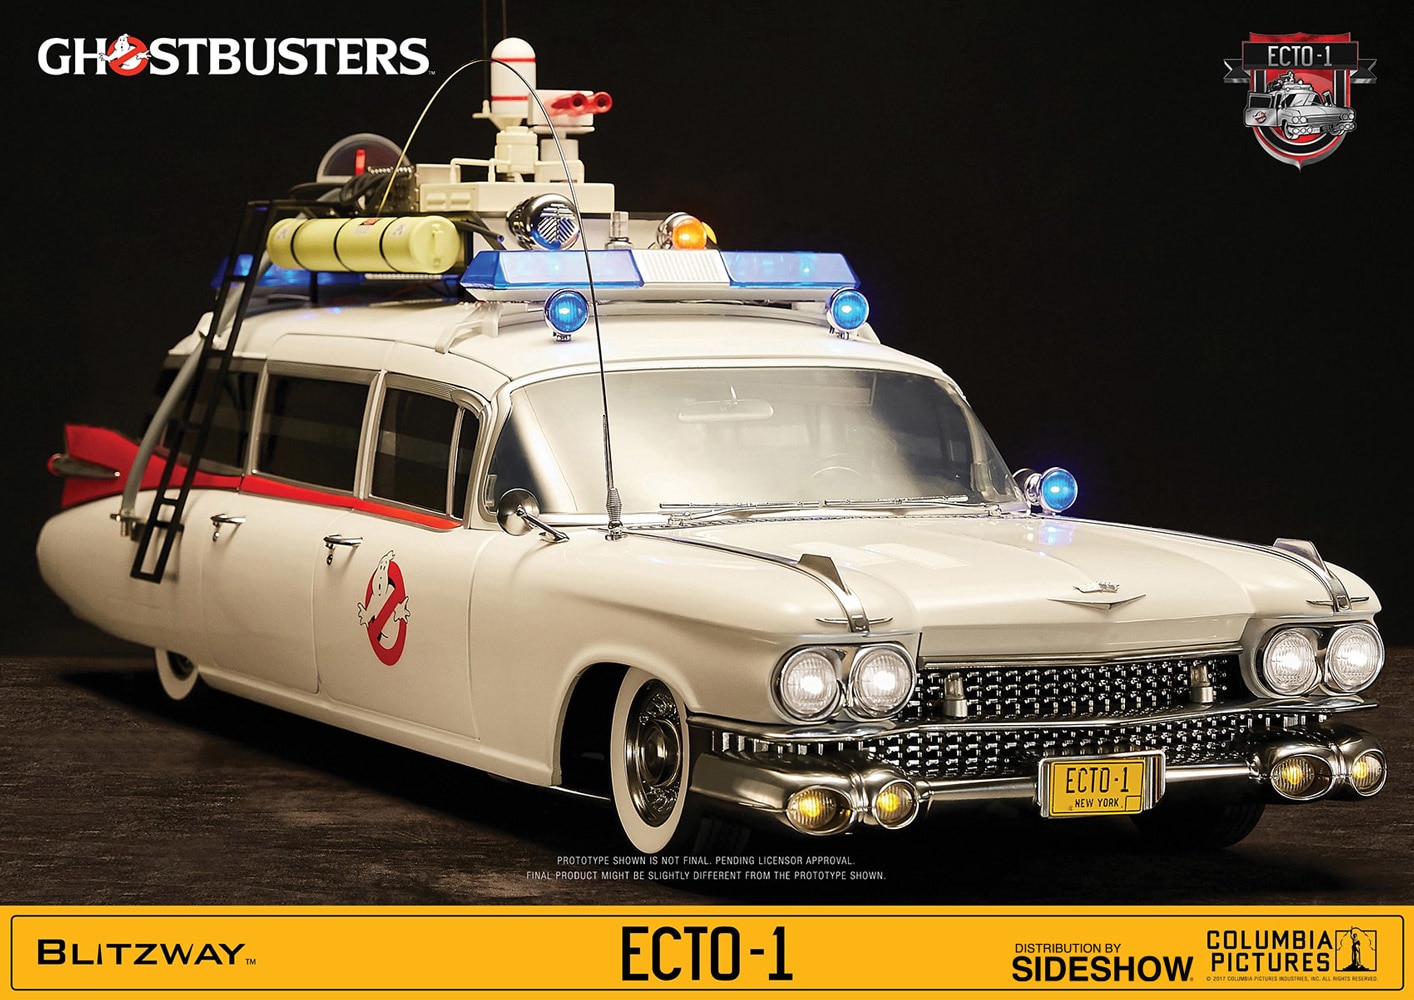 ECTO-1 Ghostbusters 1984 Sixth Scale Figure Accessory